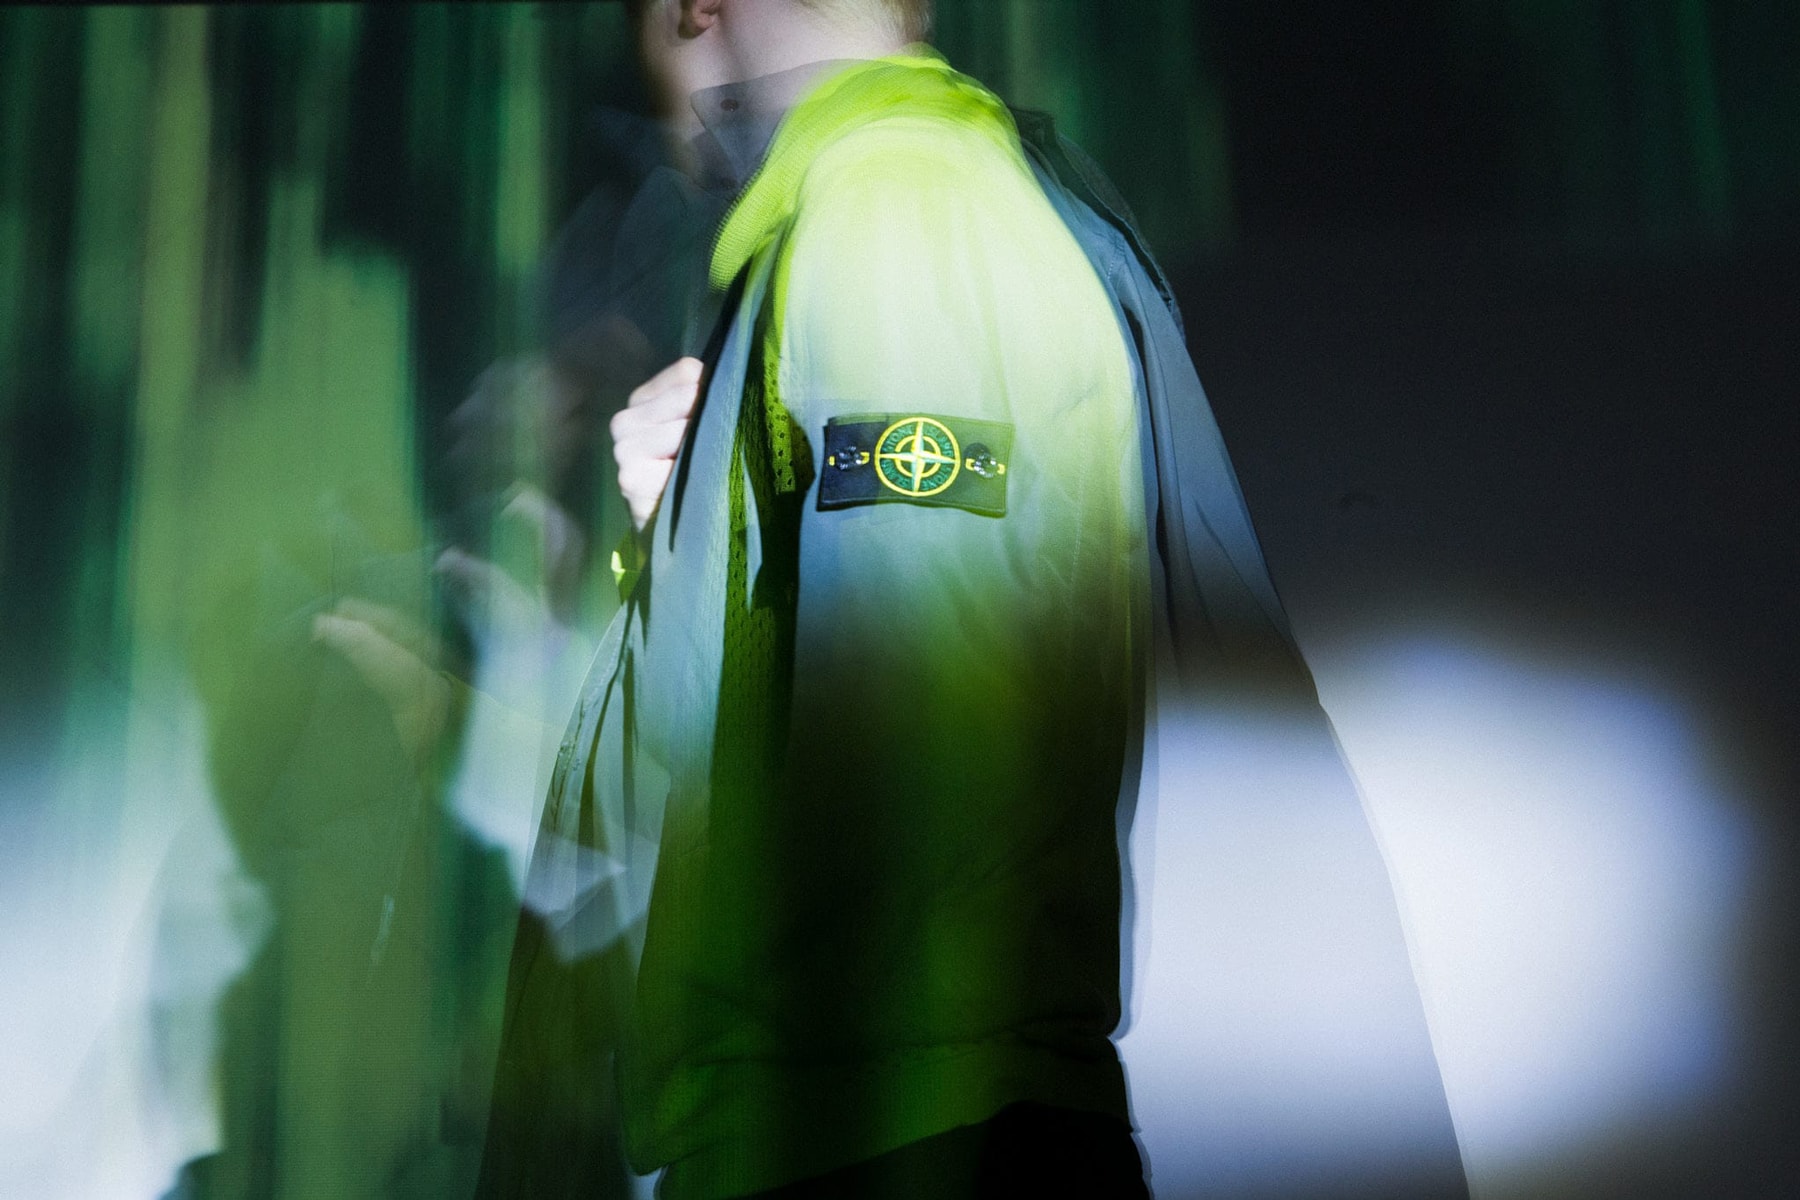 HAVEN Stone Island Spring Summer 2018 Editorial Shadow Project